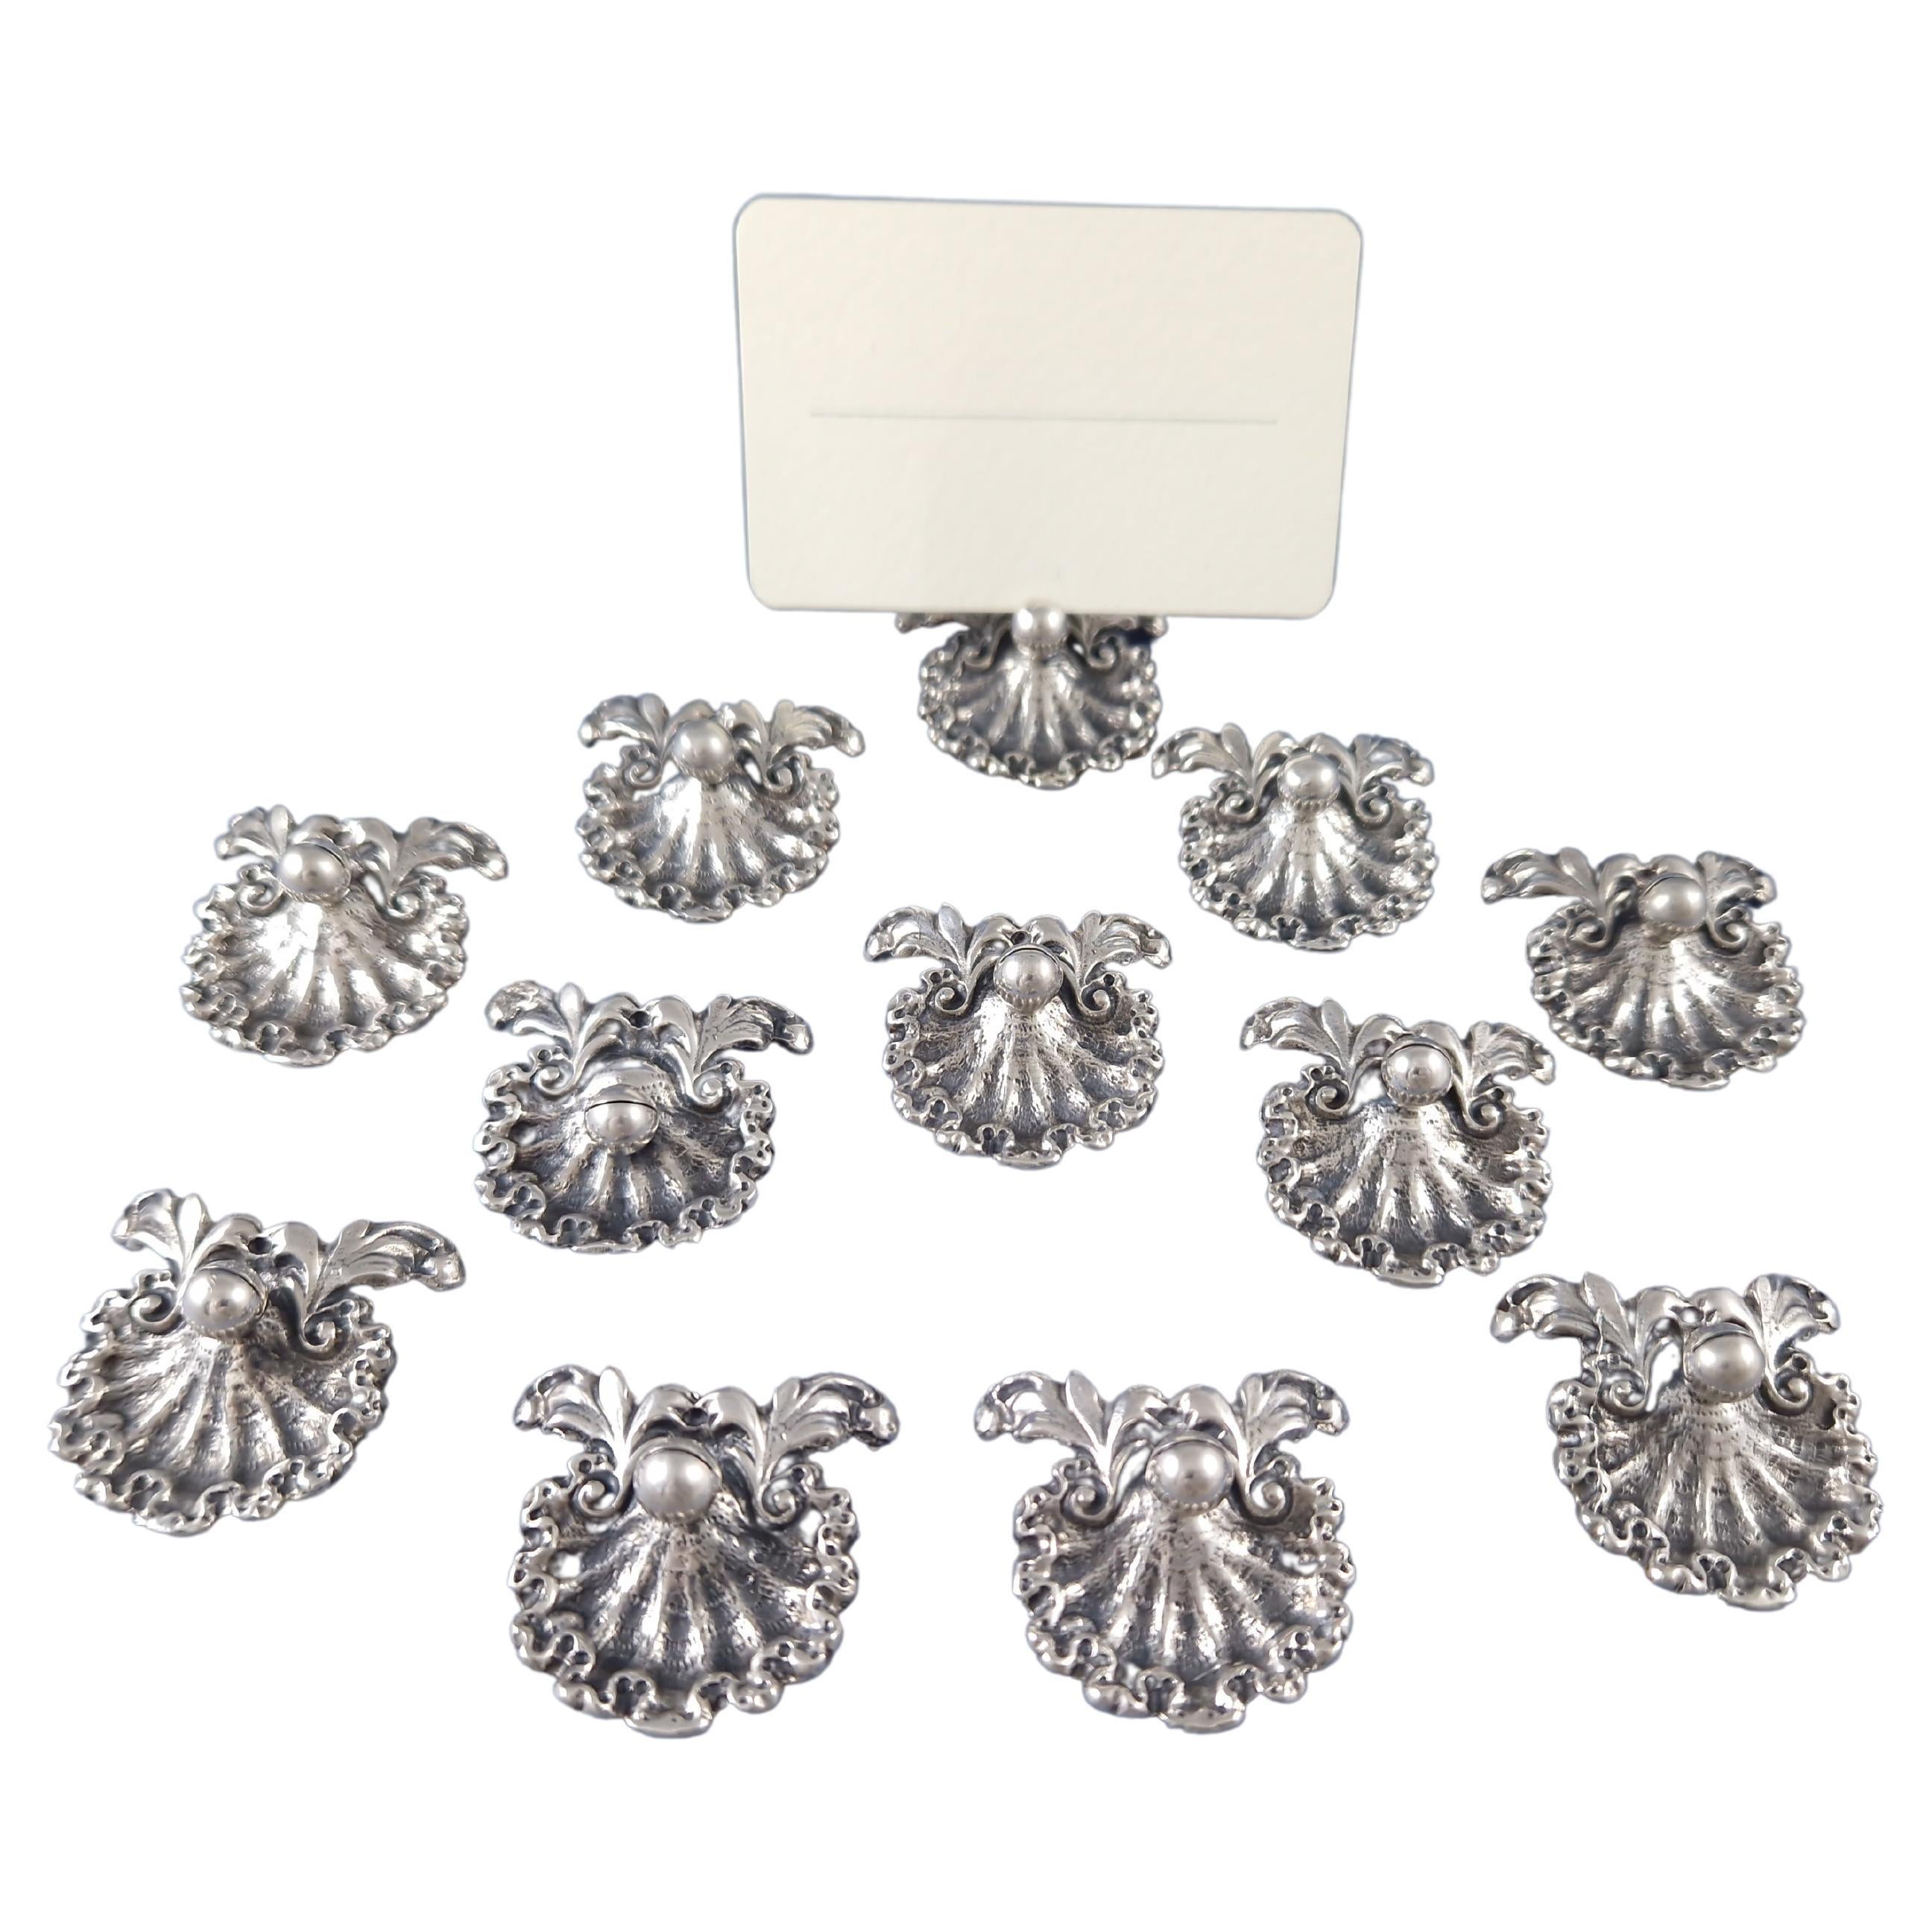 12 Place Cards Holders In Solid Silver Shell For Sale